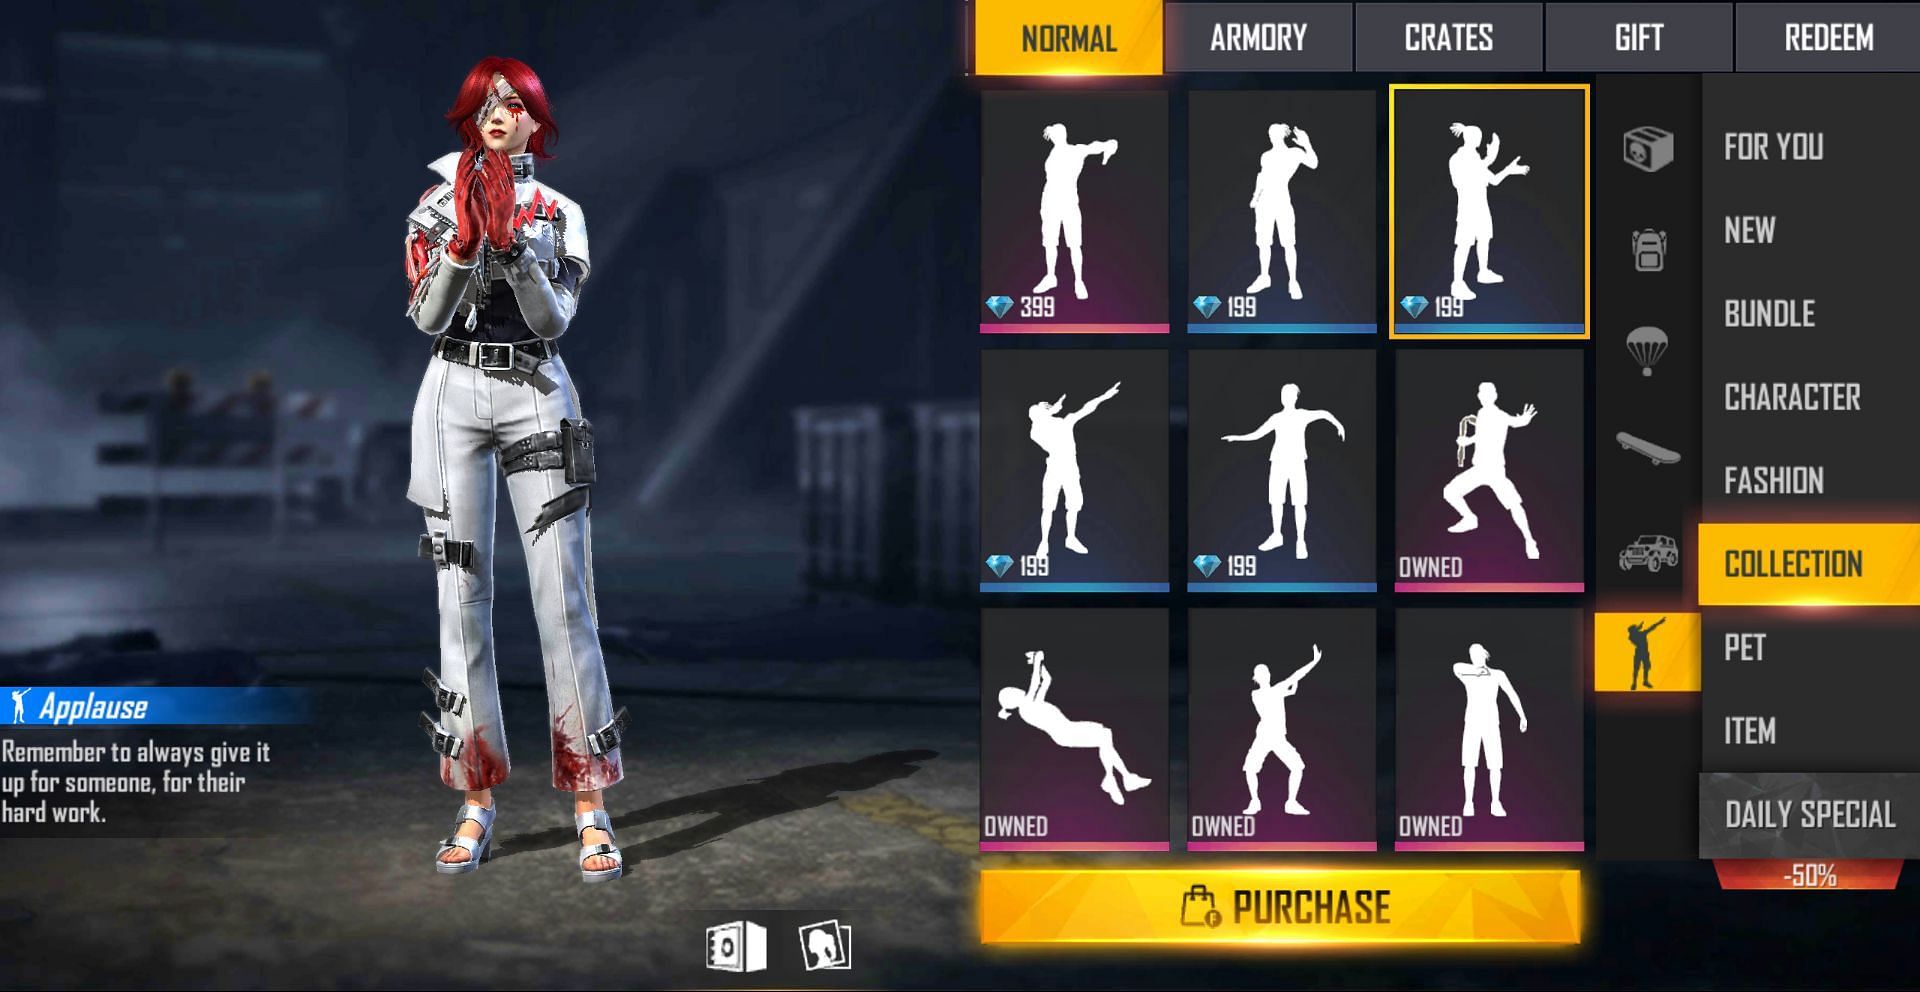 Applause can be bought for 199 diamonds (Image via Free Fire)